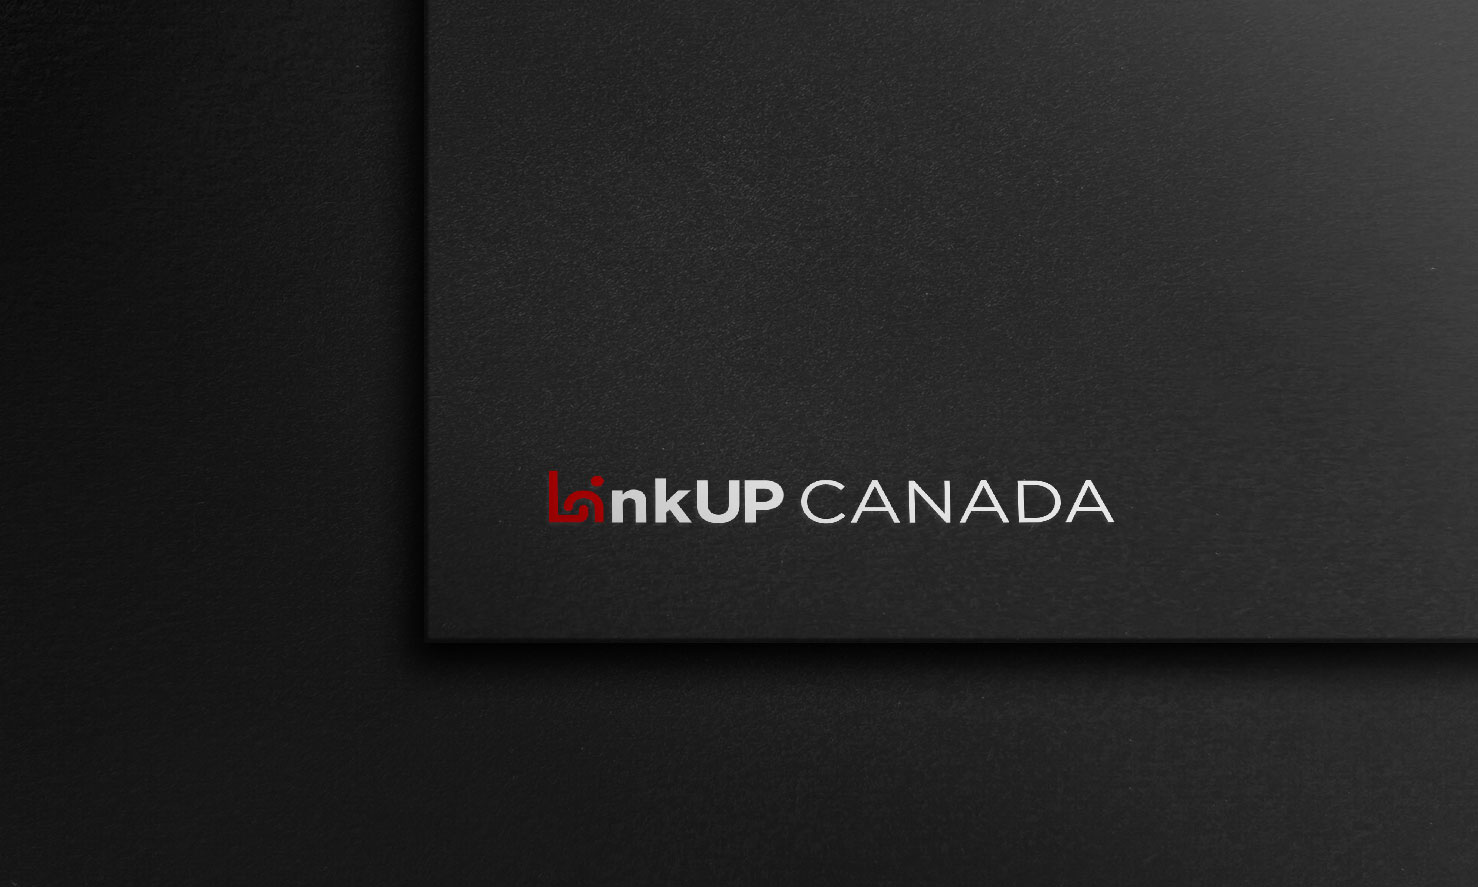 Black business card with the logo 'LinkUp CANADA' in white and red font on a textured dark background.